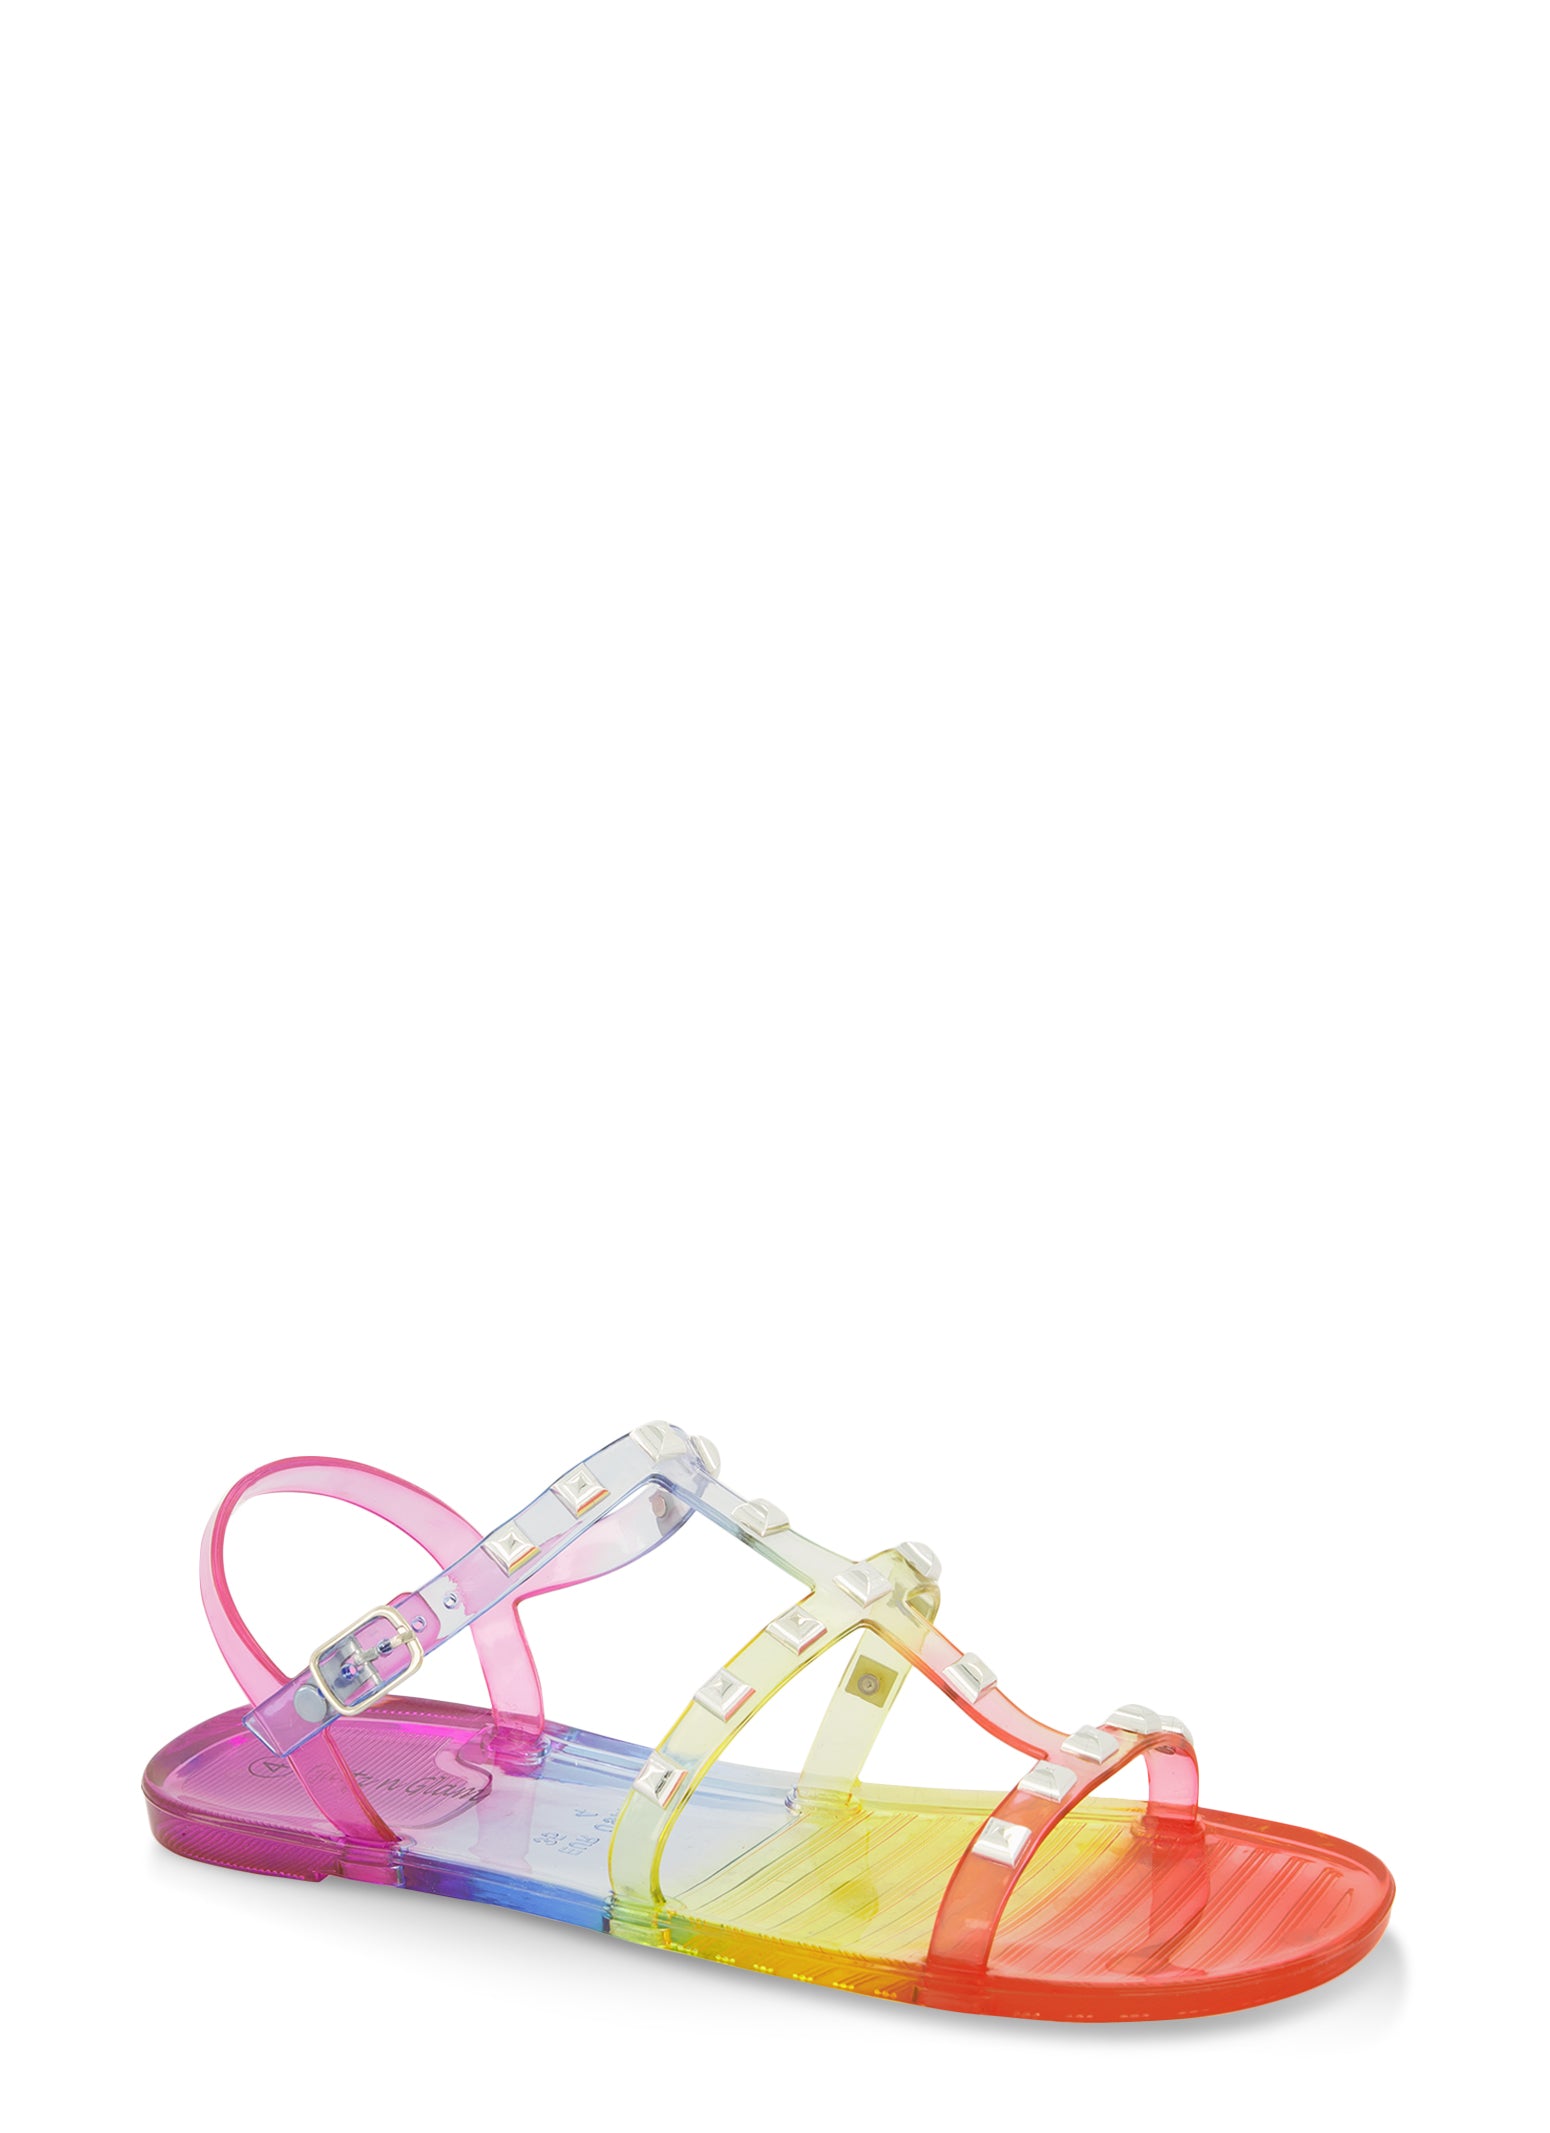 Girls Studded Jelly Sandals